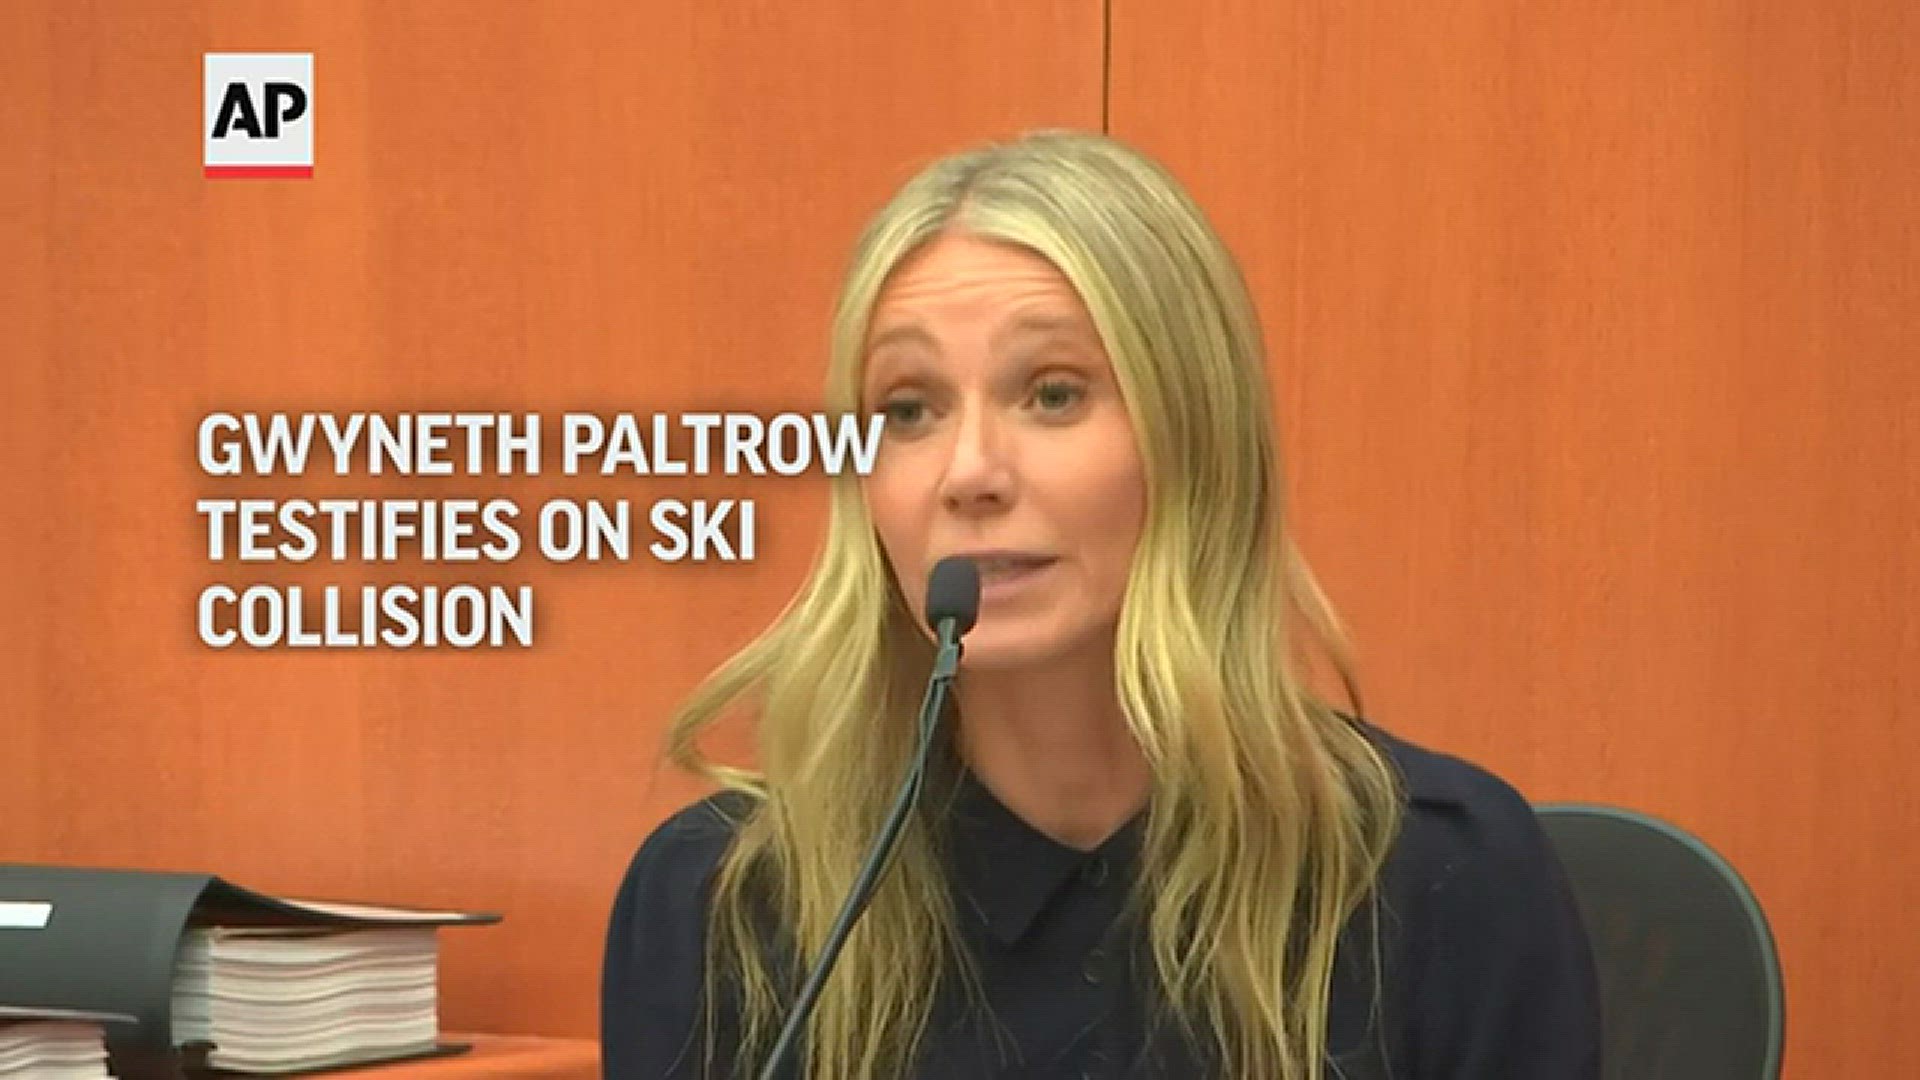 Paltrow says Friday that the 76-year-old Utah man is the culprit for the collision, and her legal team has raised questions about the man's motivations.